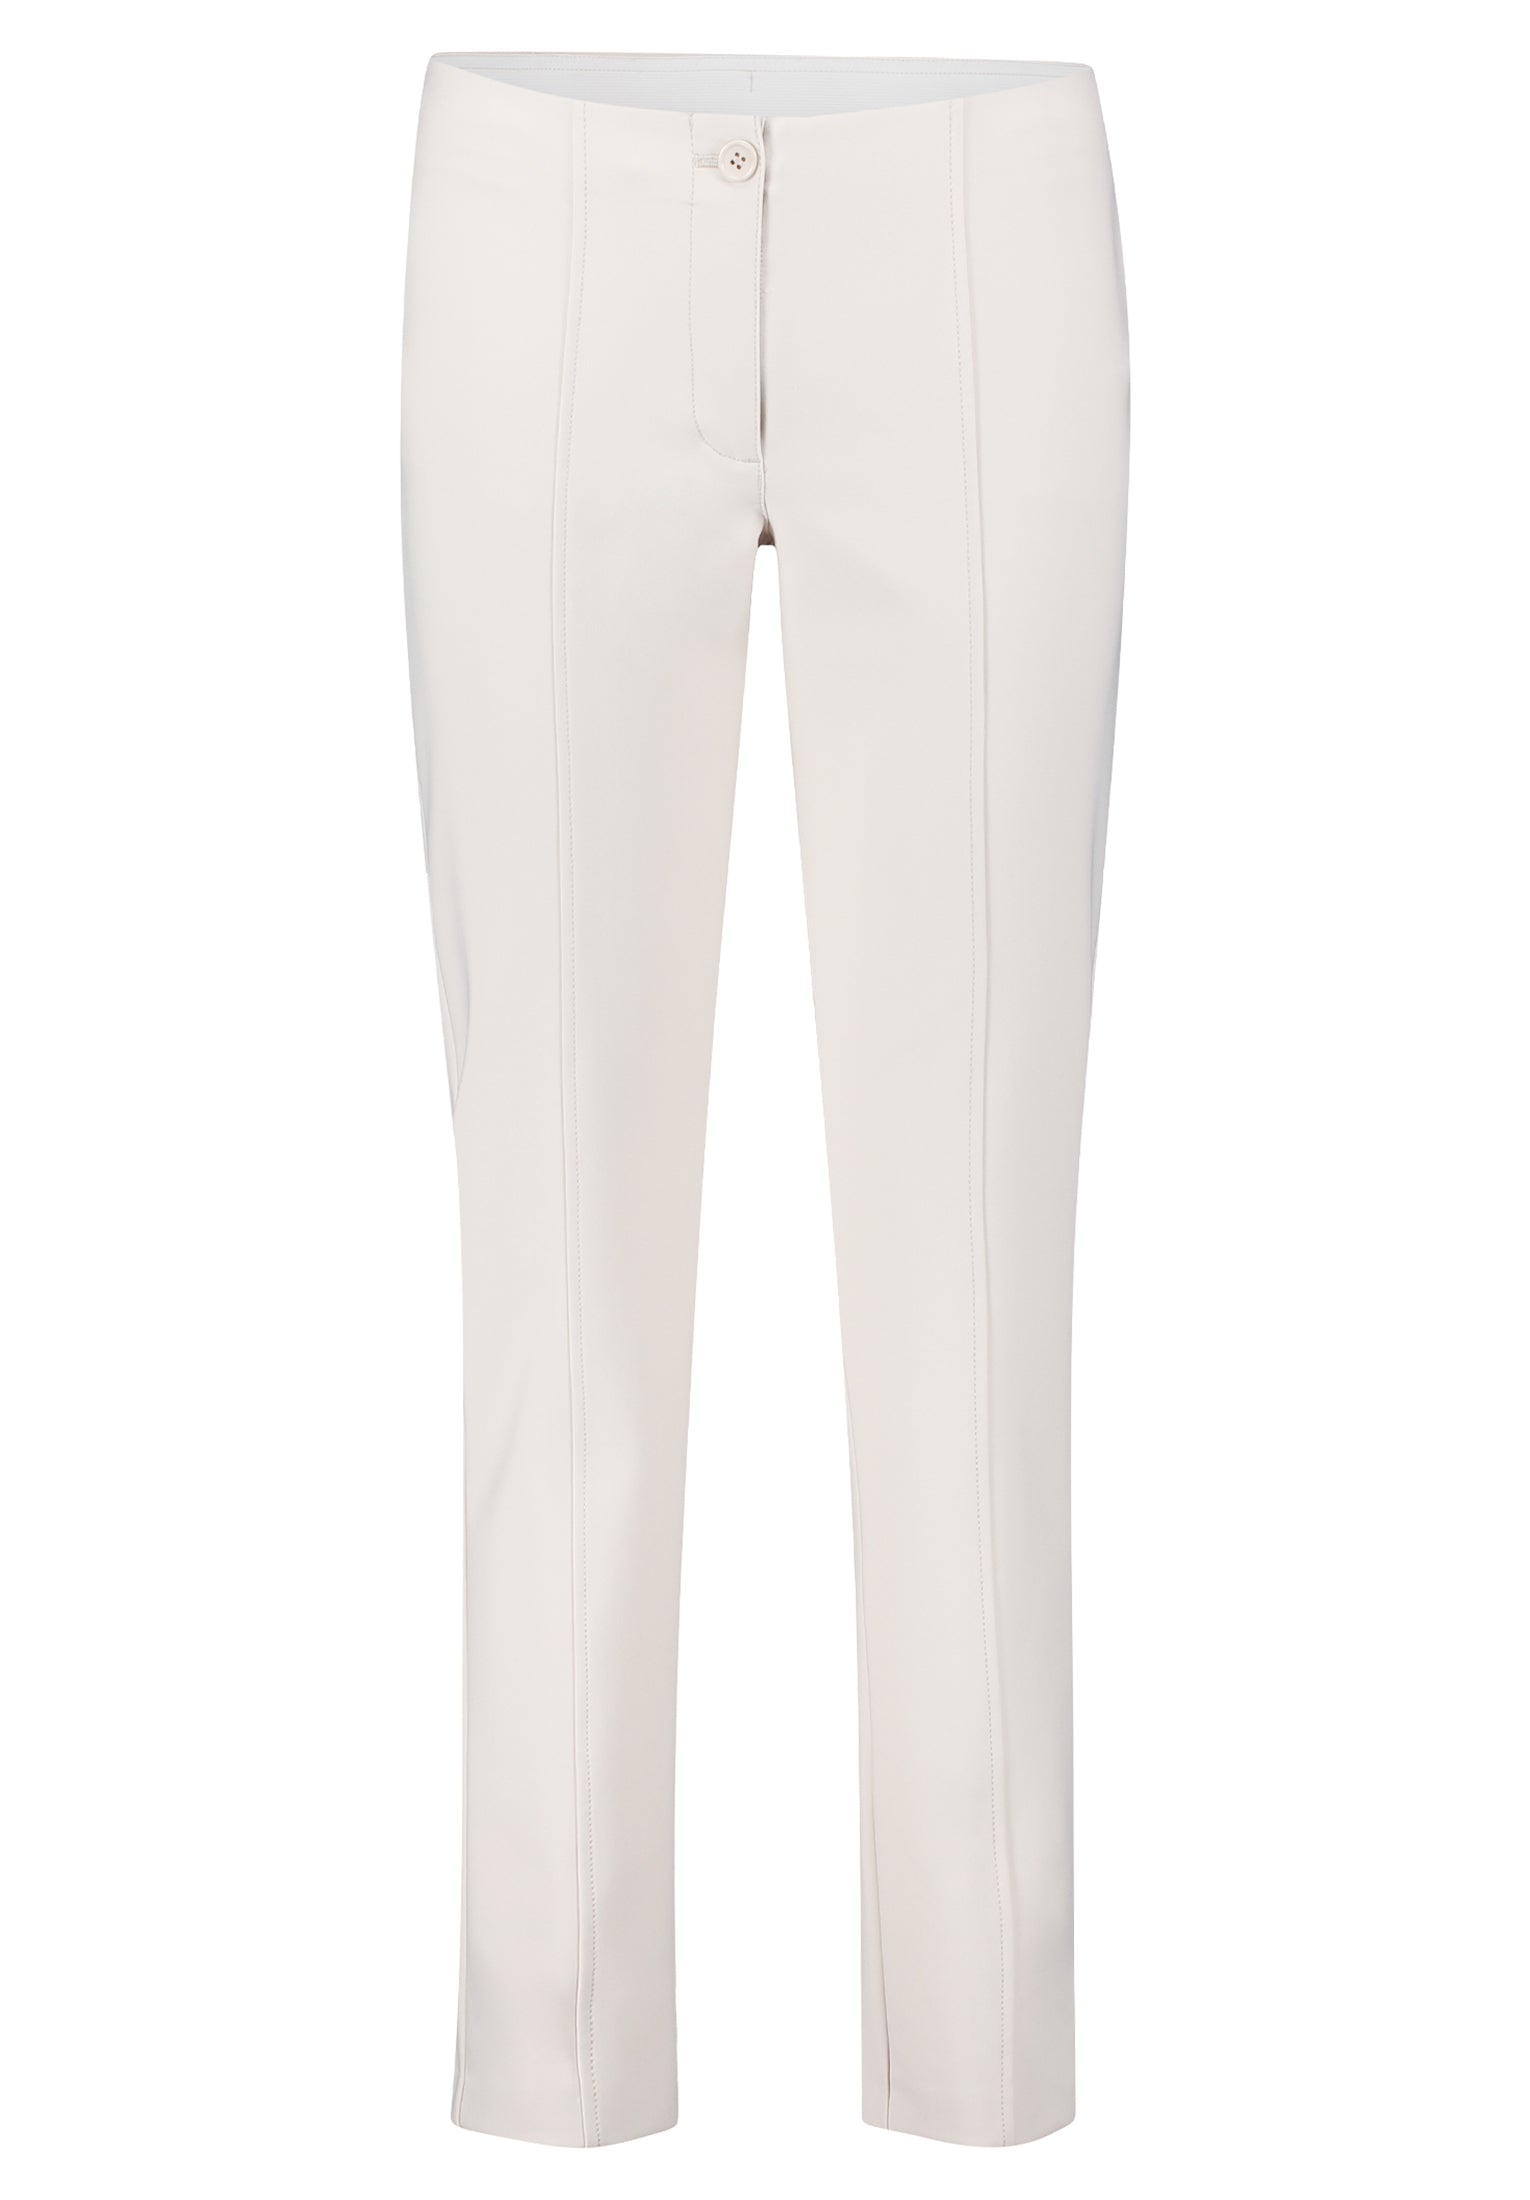 Beige Skinny Fit Chino Trousers_6812-2150_9106_07